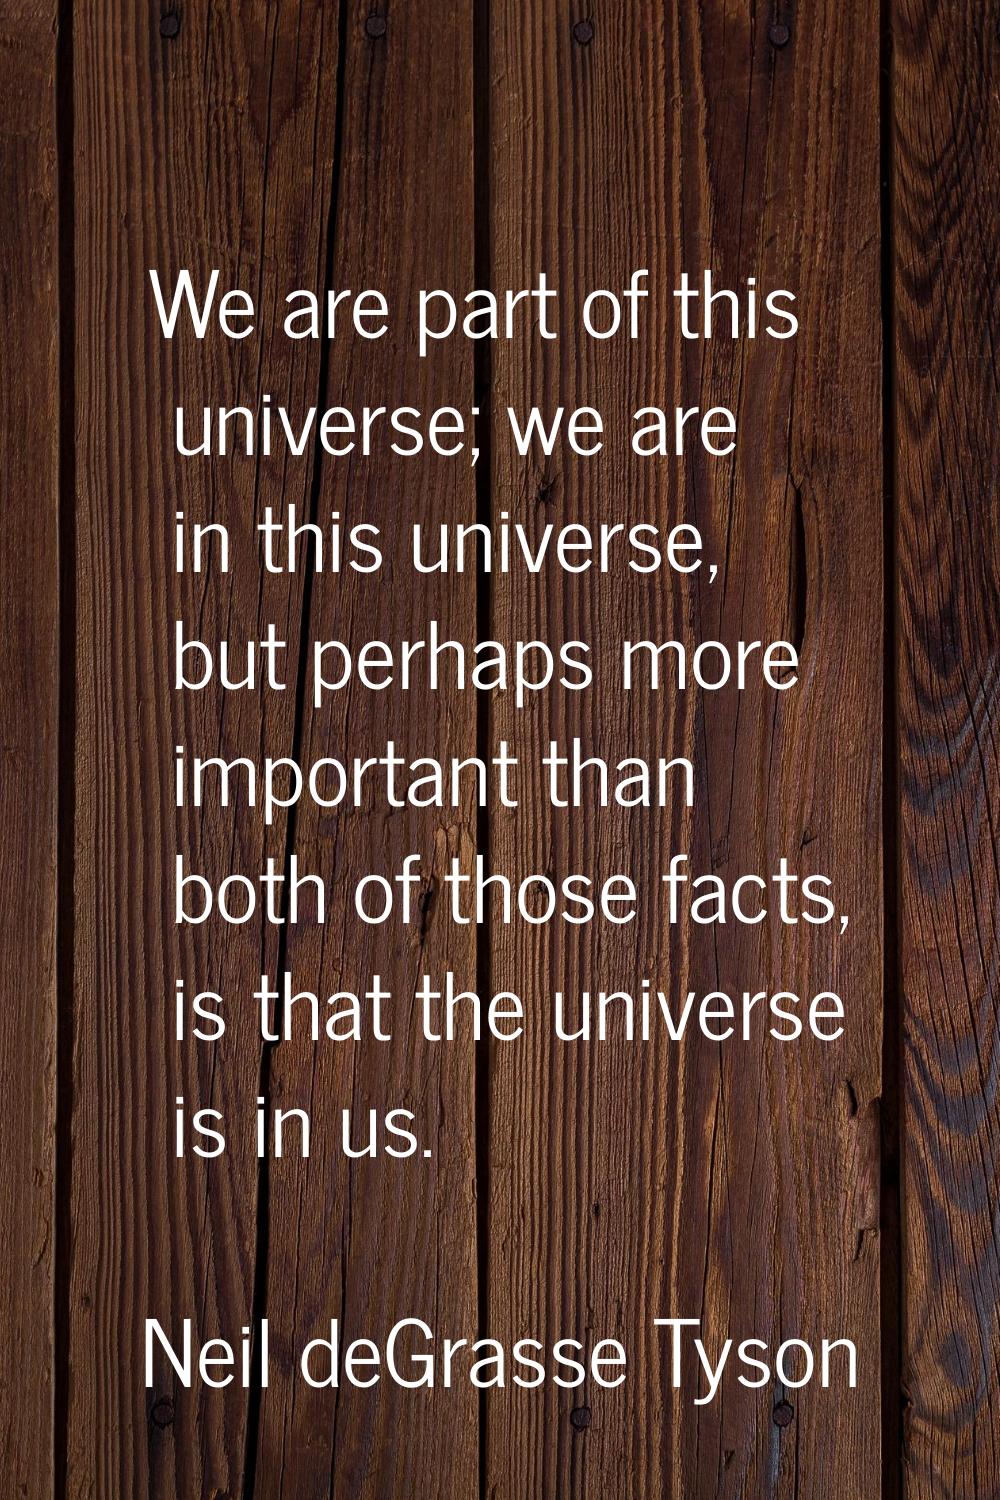 We are part of this universe; we are in this universe, but perhaps more important than both of thos